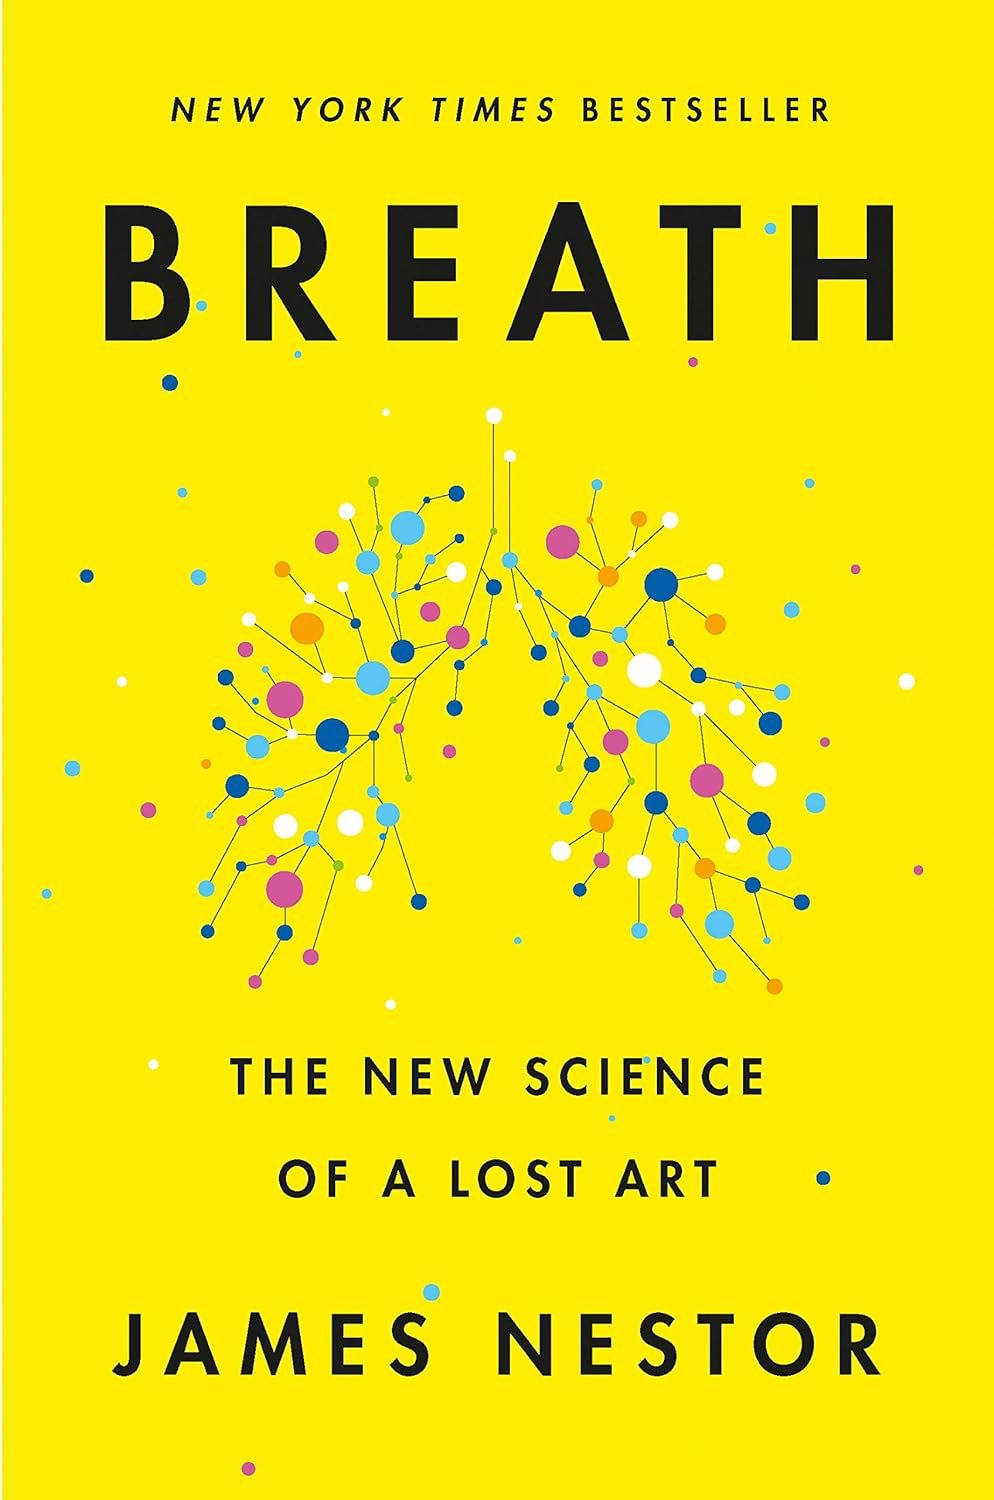 Breath: The New Science of a Lost Art     Hardcover – May 26, 2020